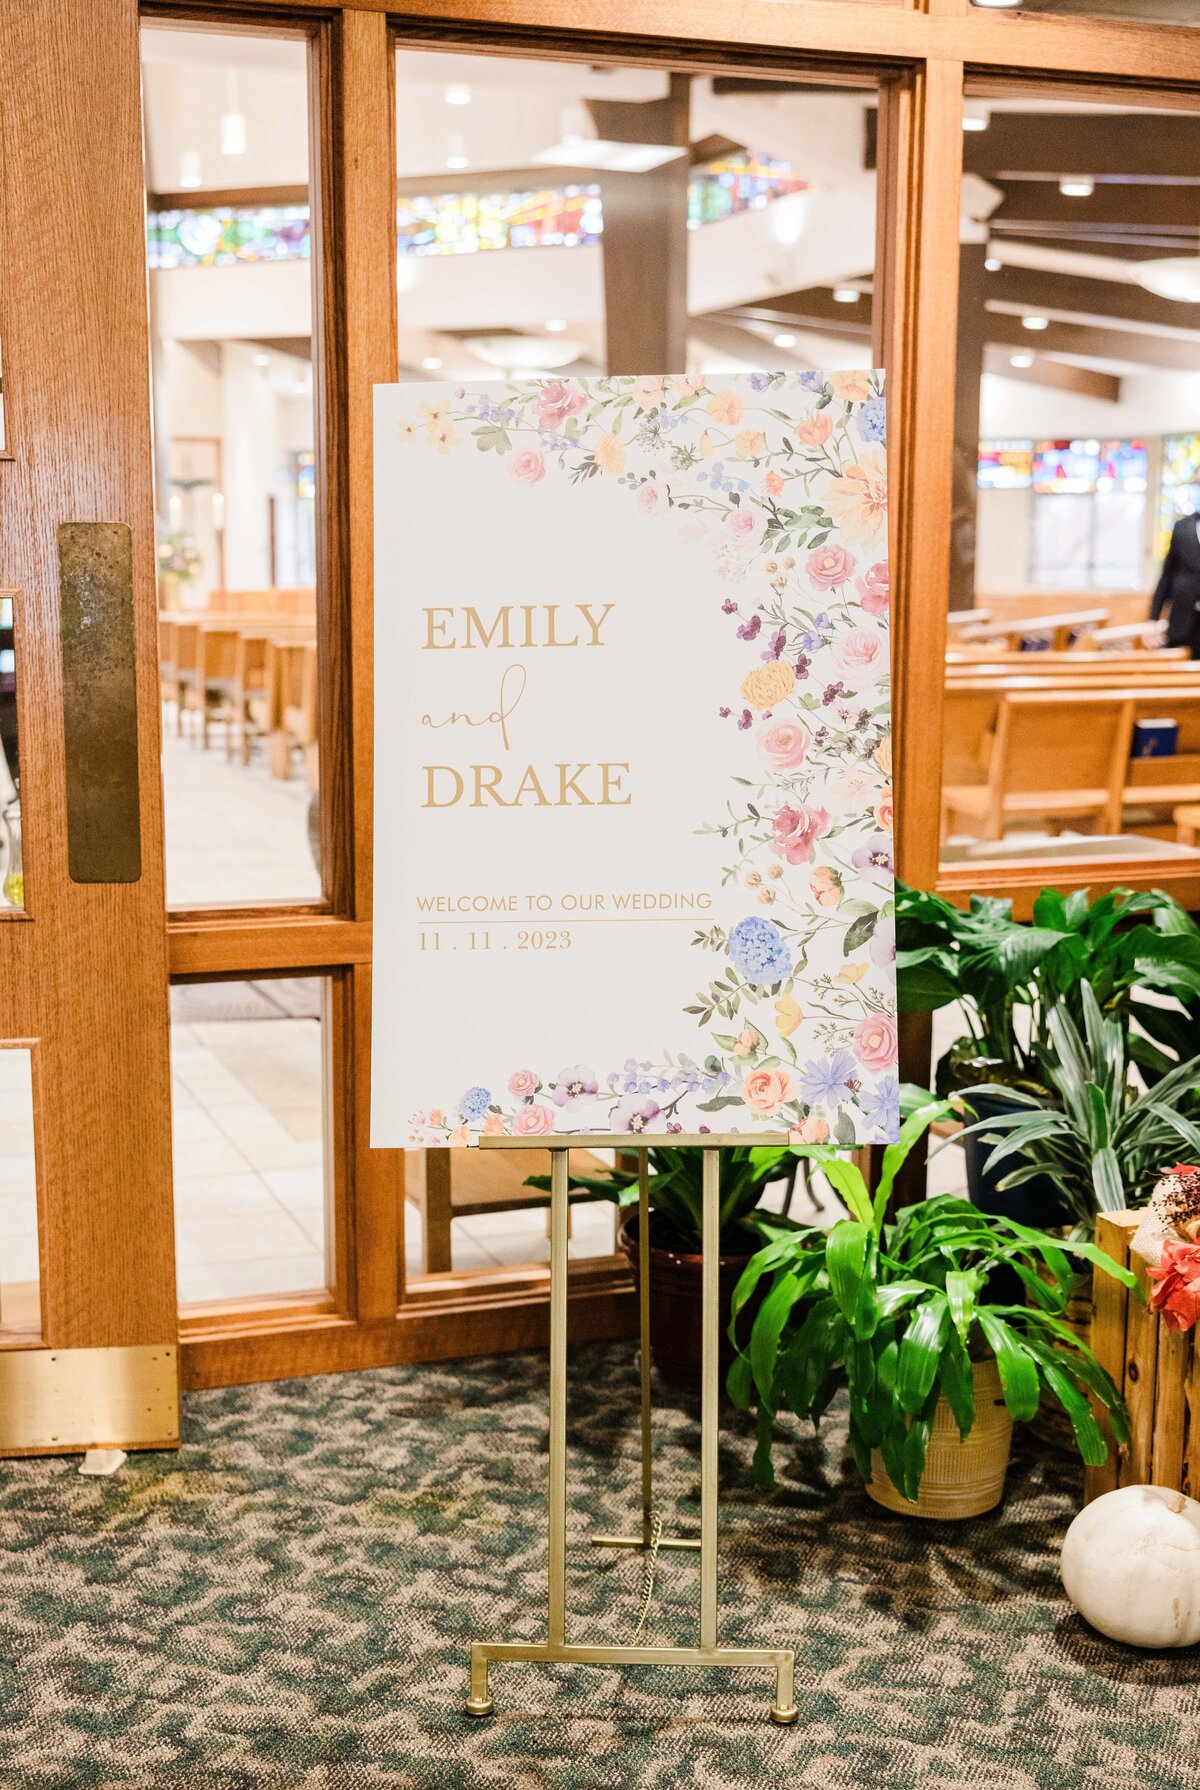 A wedding welcome sign featuring the names “Emily and Drake” with a floral border, dated November 1, 2023, standing in the entrance of Park Farm Winery.